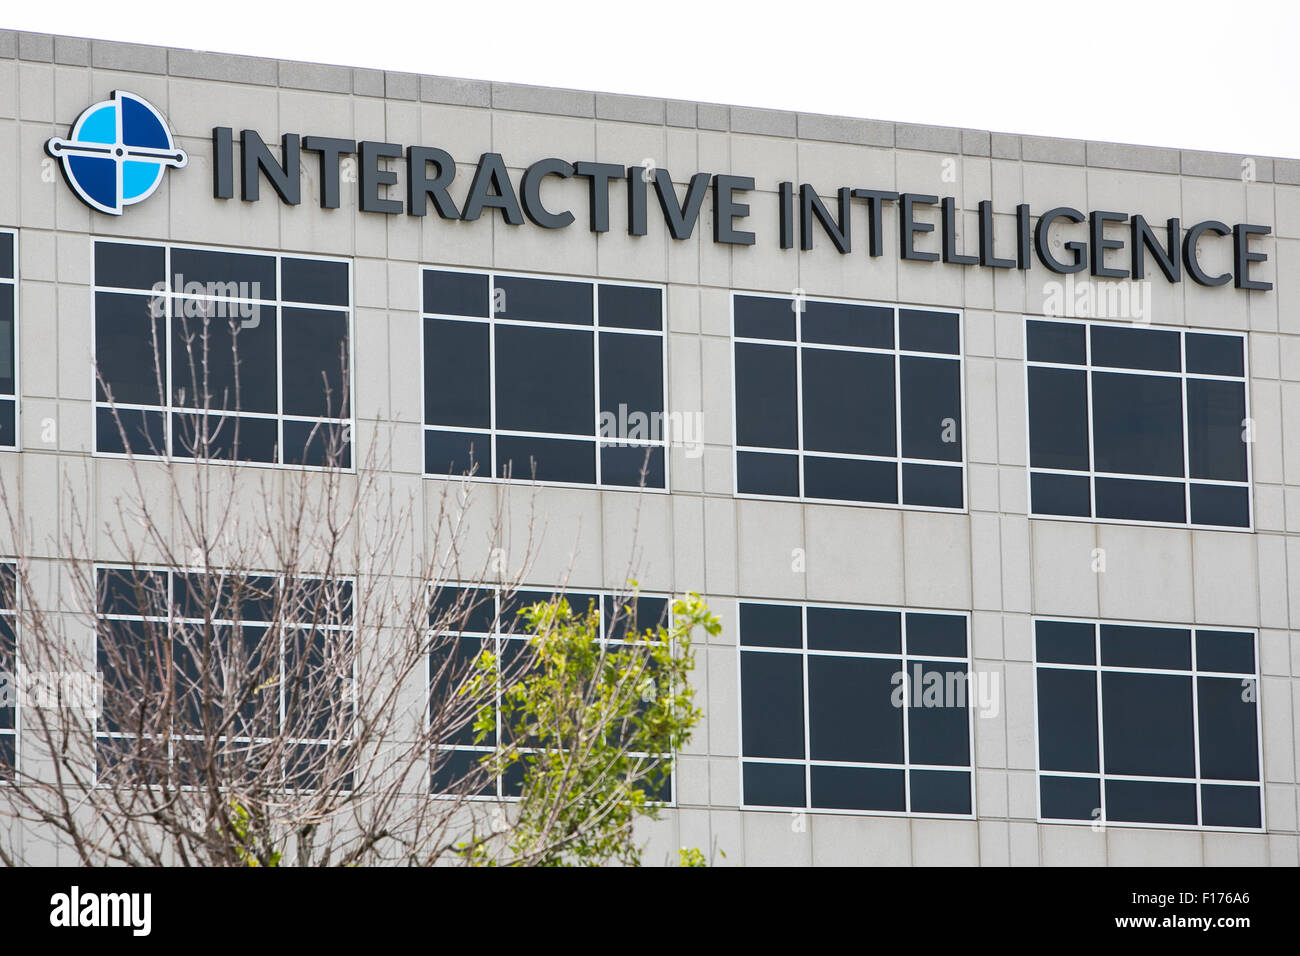 A logo sign outside of the headquarters of Interactive Intelligence, Inc., in Indianapolis, Indiana on August 15, 2015. Stock Photo